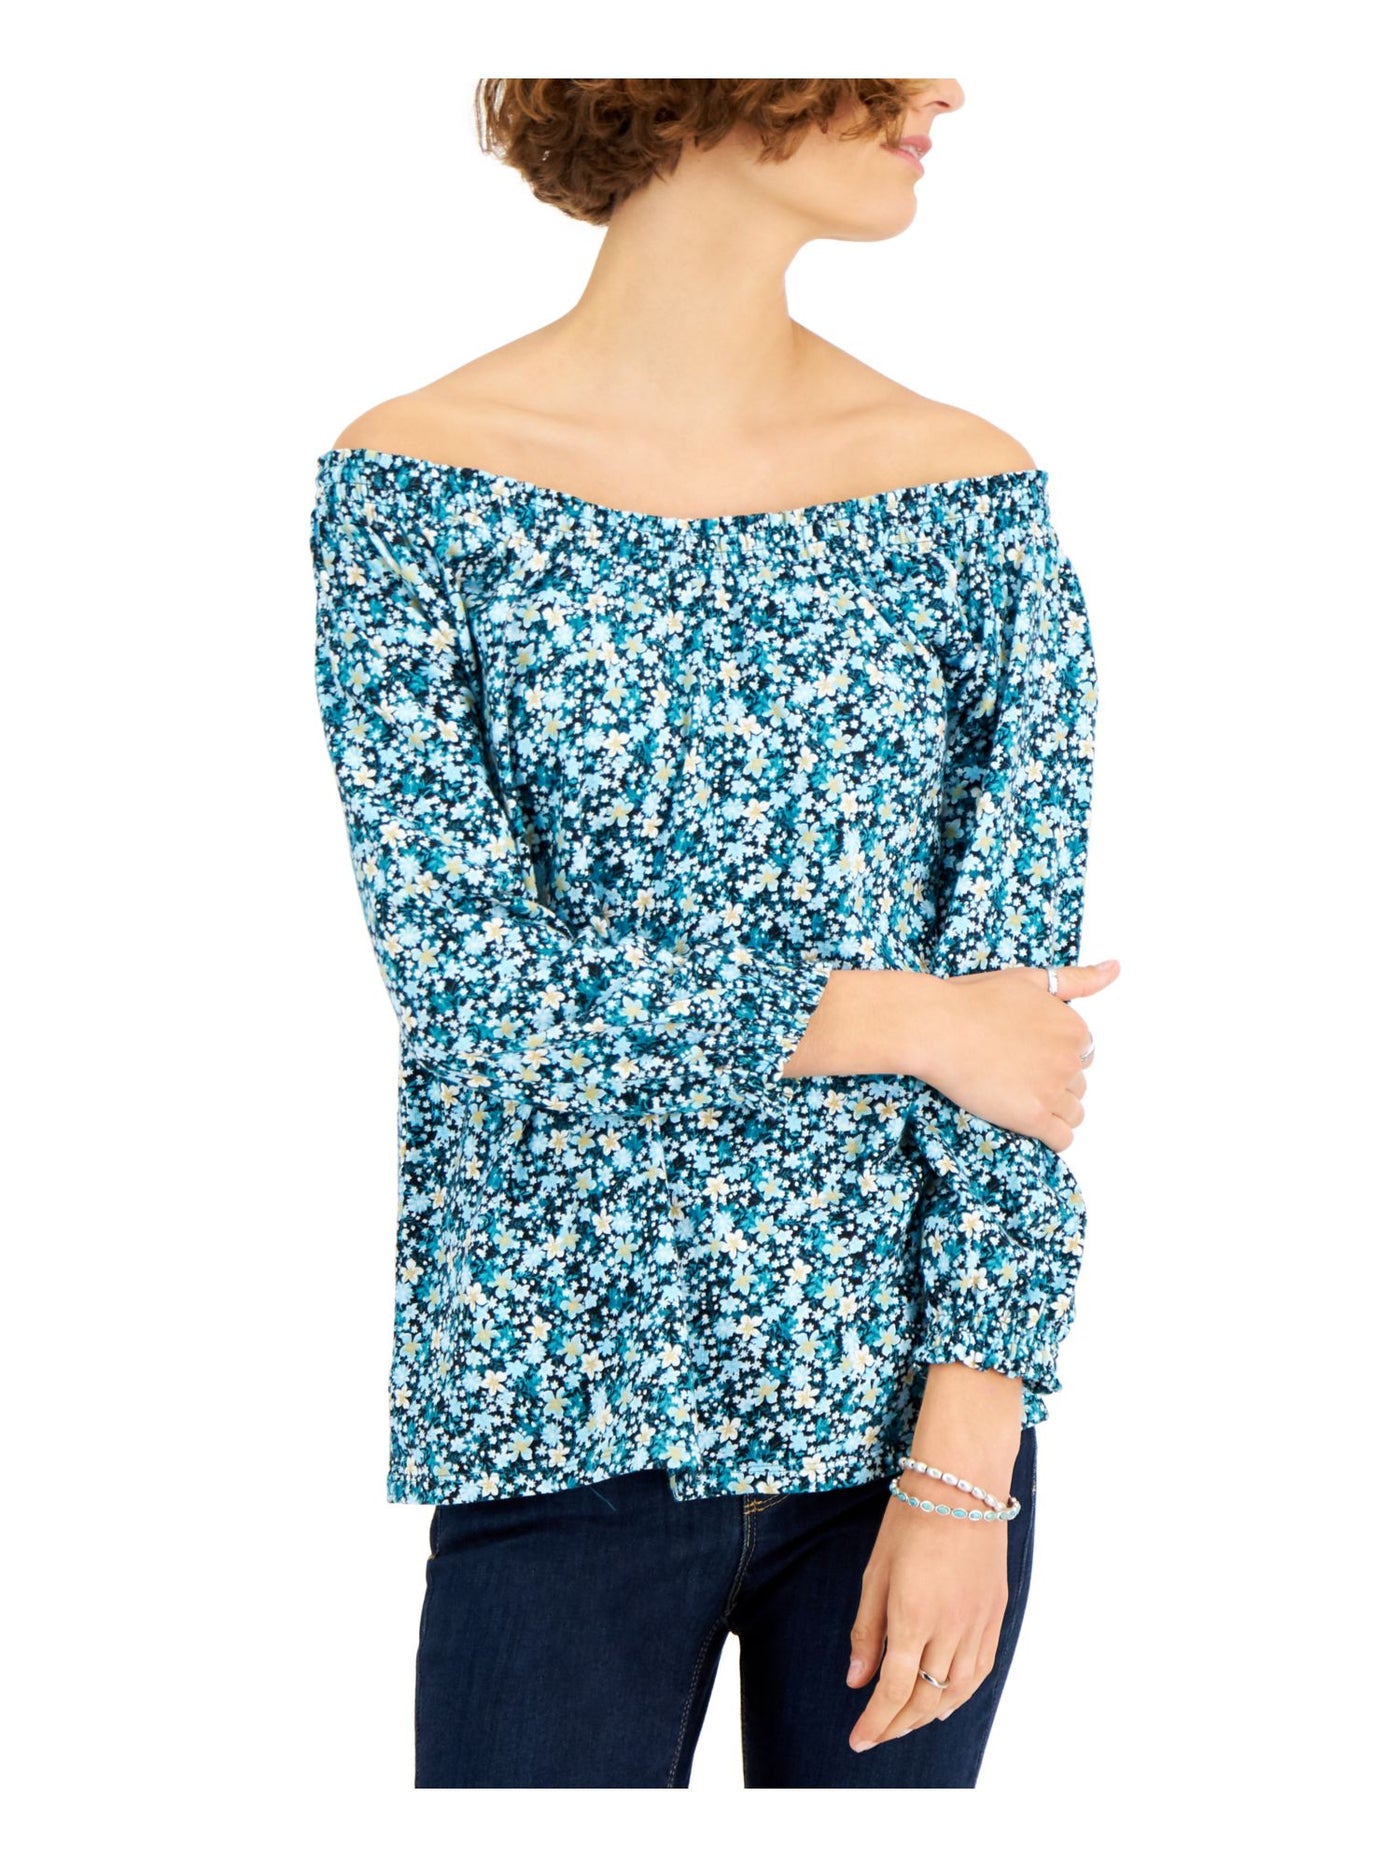 STYLE & COMPANY Womens Teal Smocked Floral 3/4 Sleeve Off Shoulder Peasant Top XS